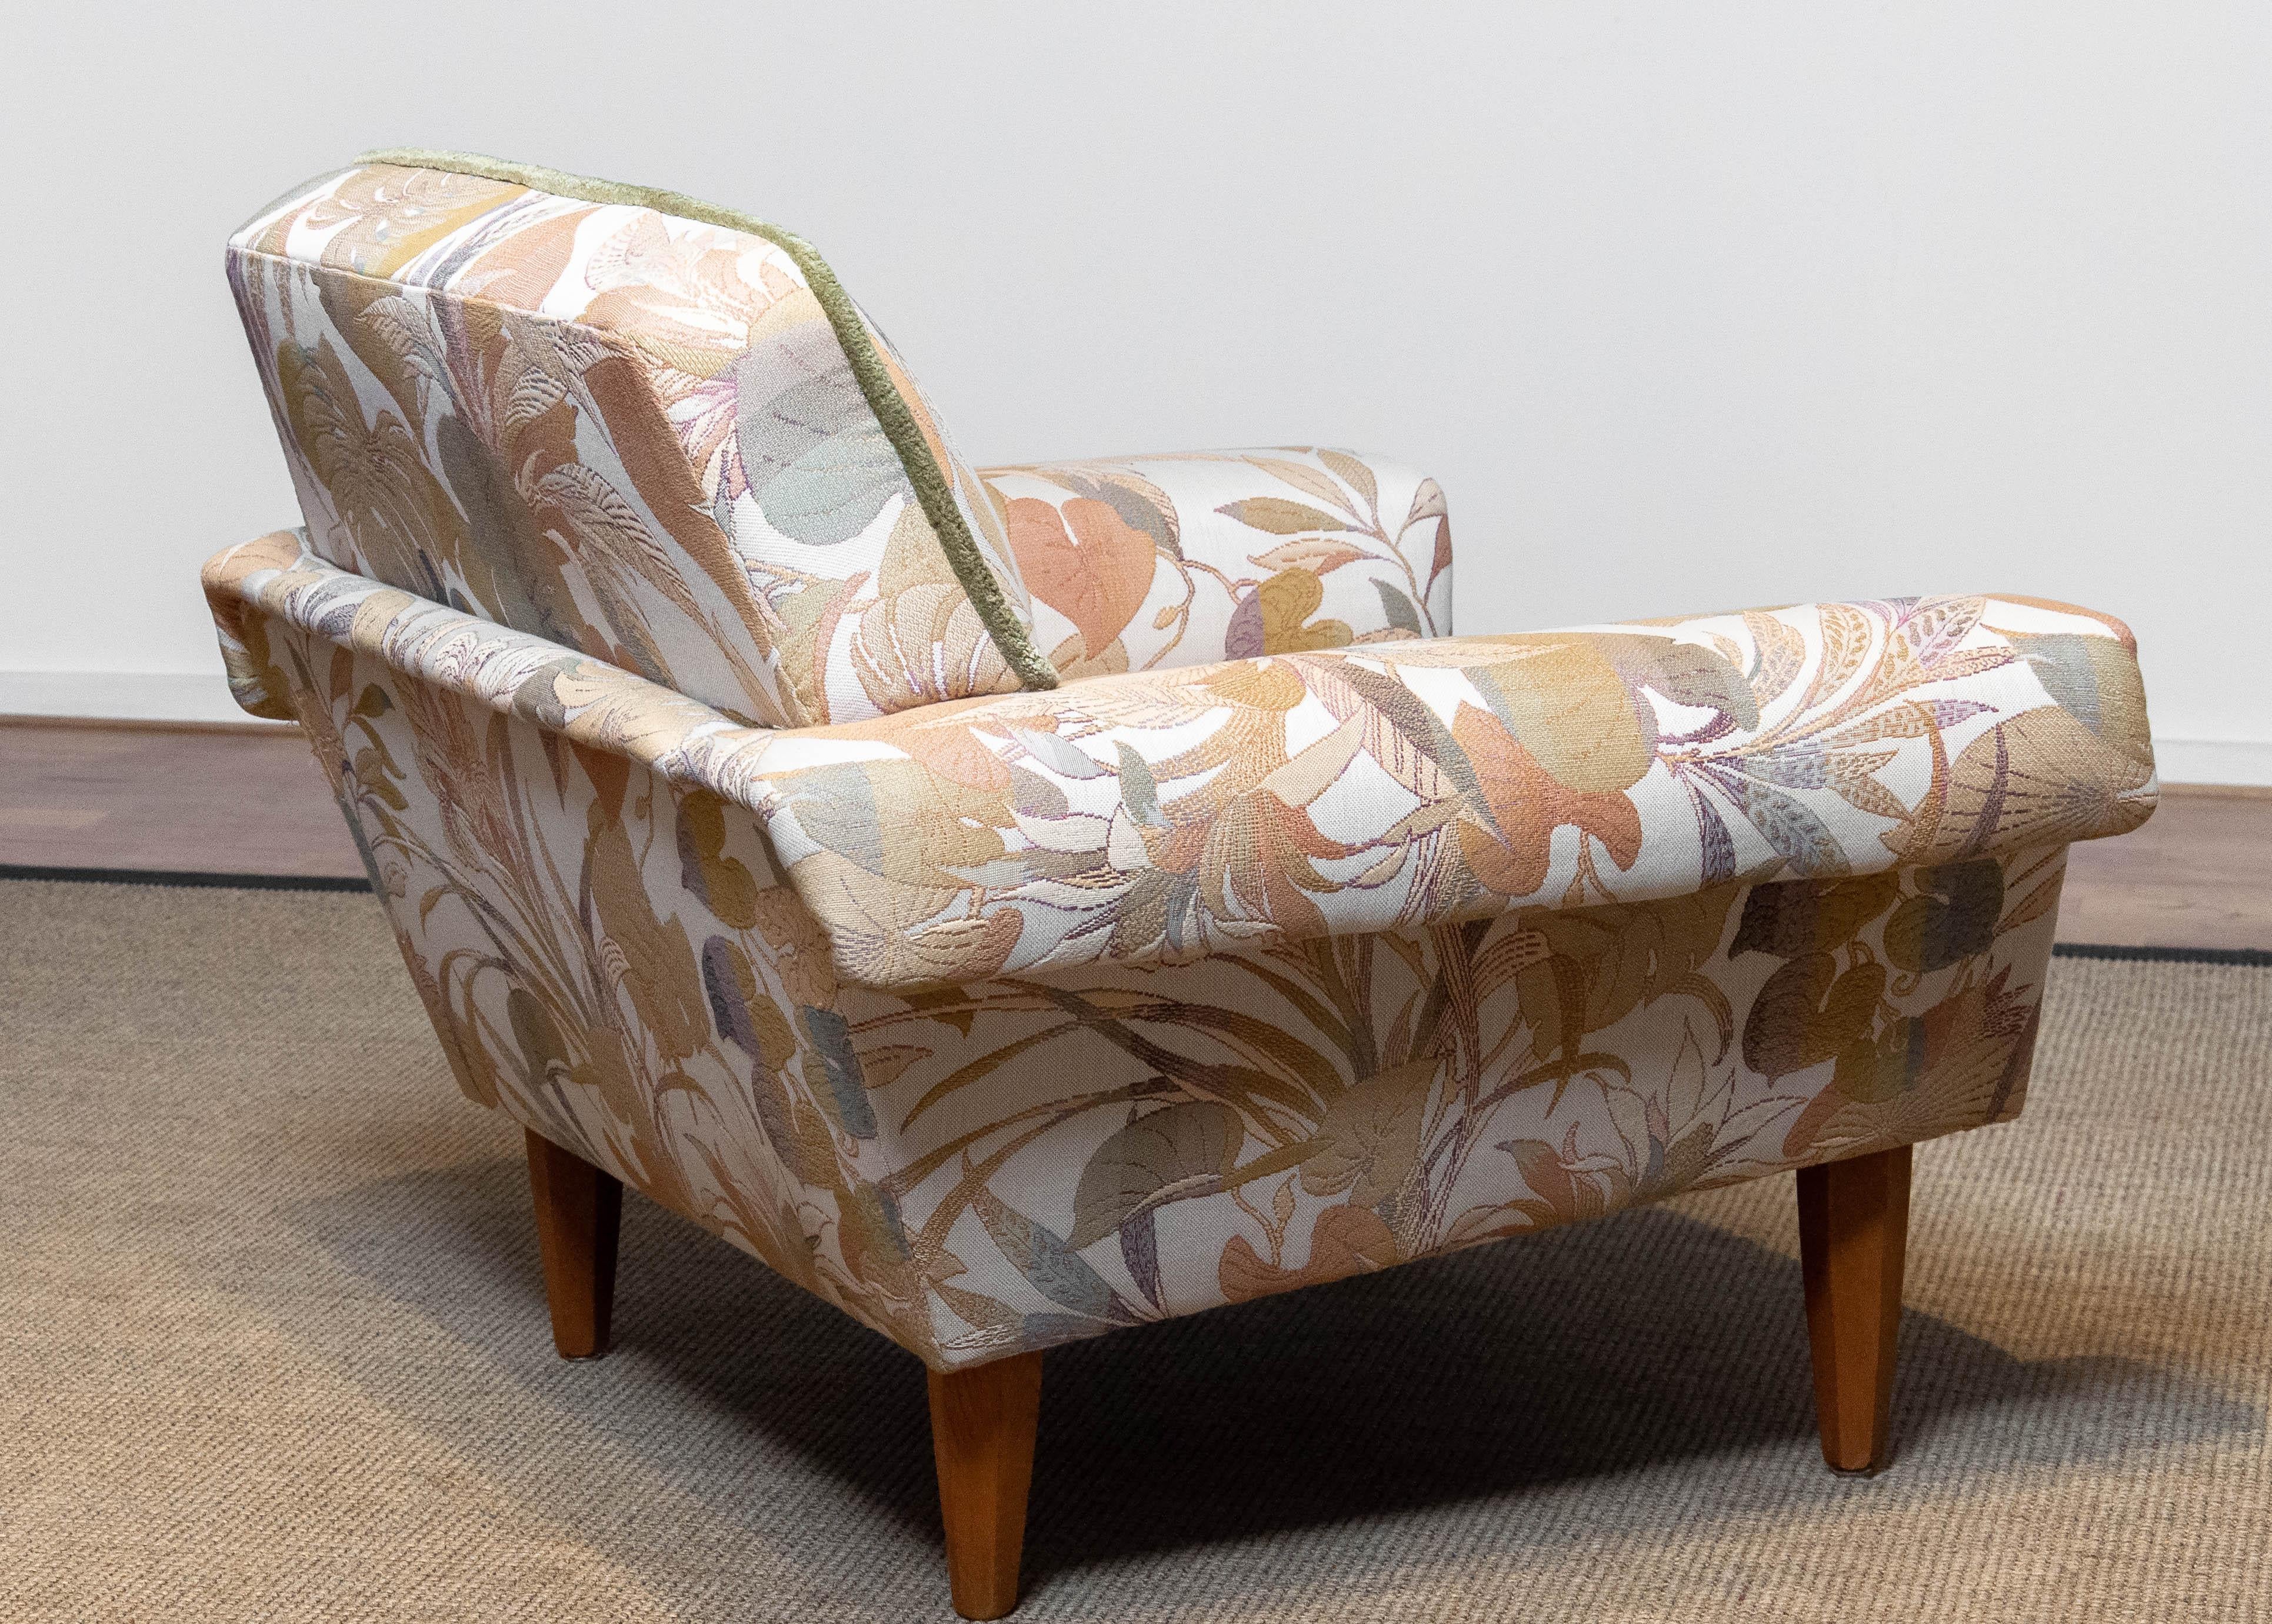 Danish Low Back Lounge Chair Upholstered Floral Jacquard Fabric from the 1970's In Good Condition For Sale In Silvolde, Gelderland